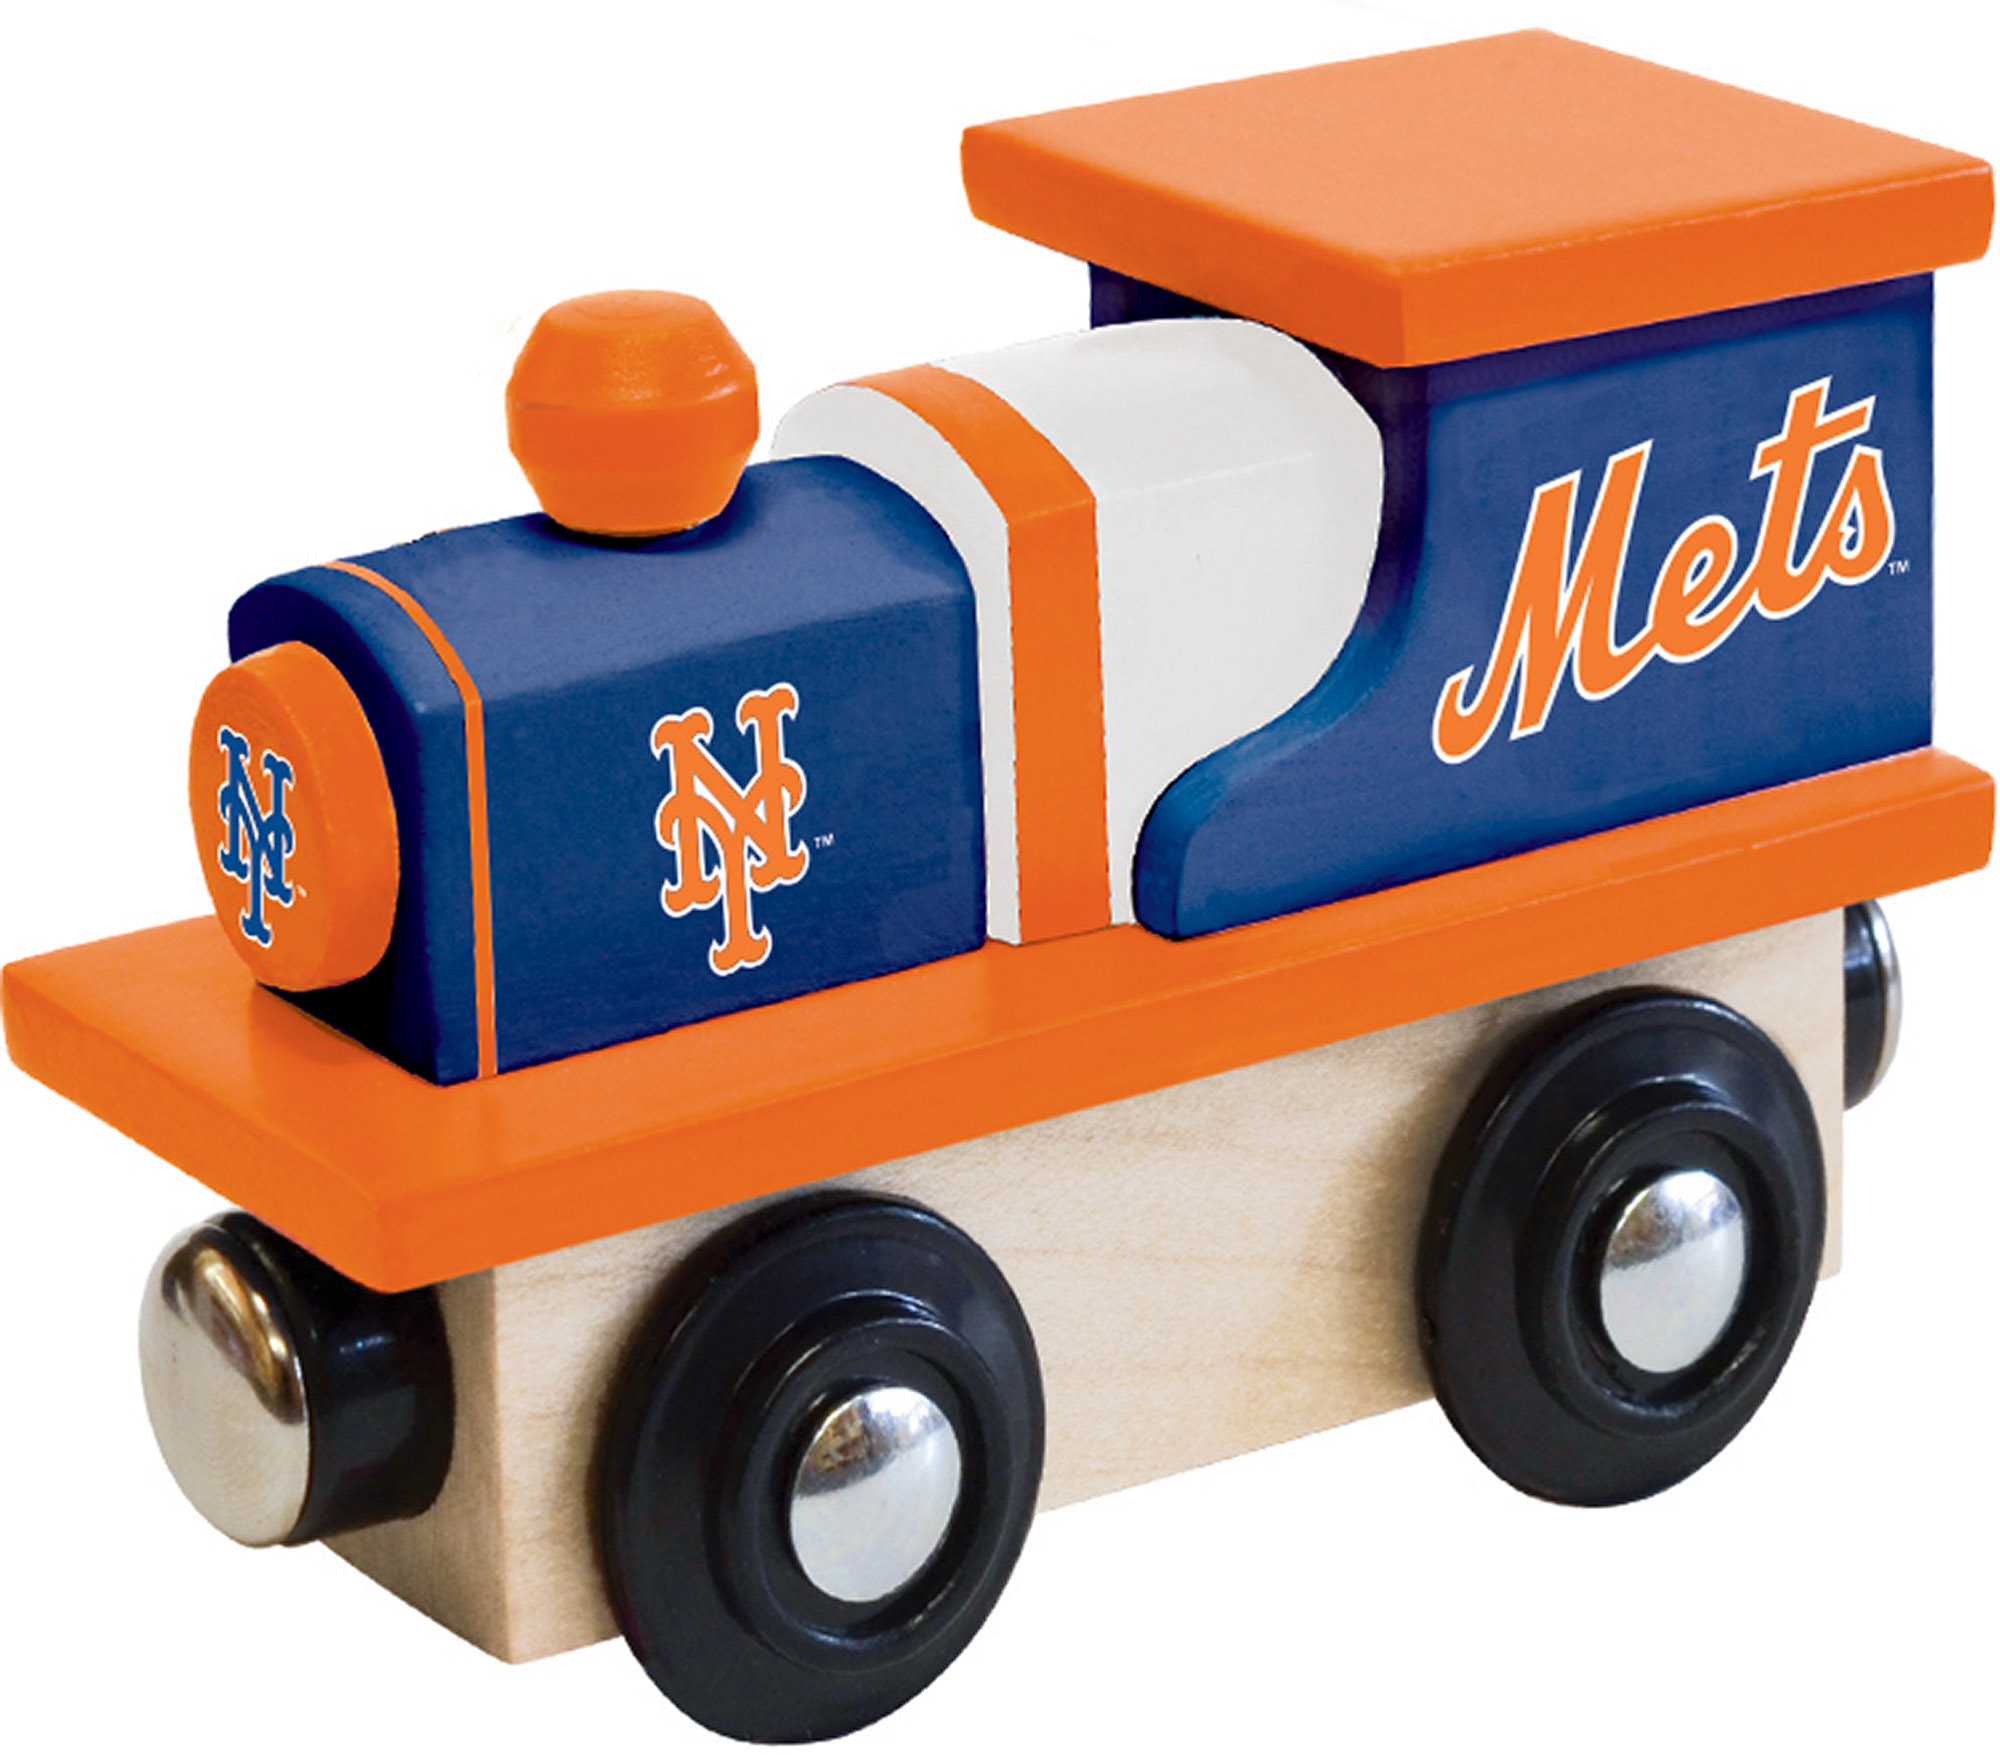 MasterPieces Officially Licensed MLB New York Mets Wooden Toy Train Engine For Kids - image 1 of 5